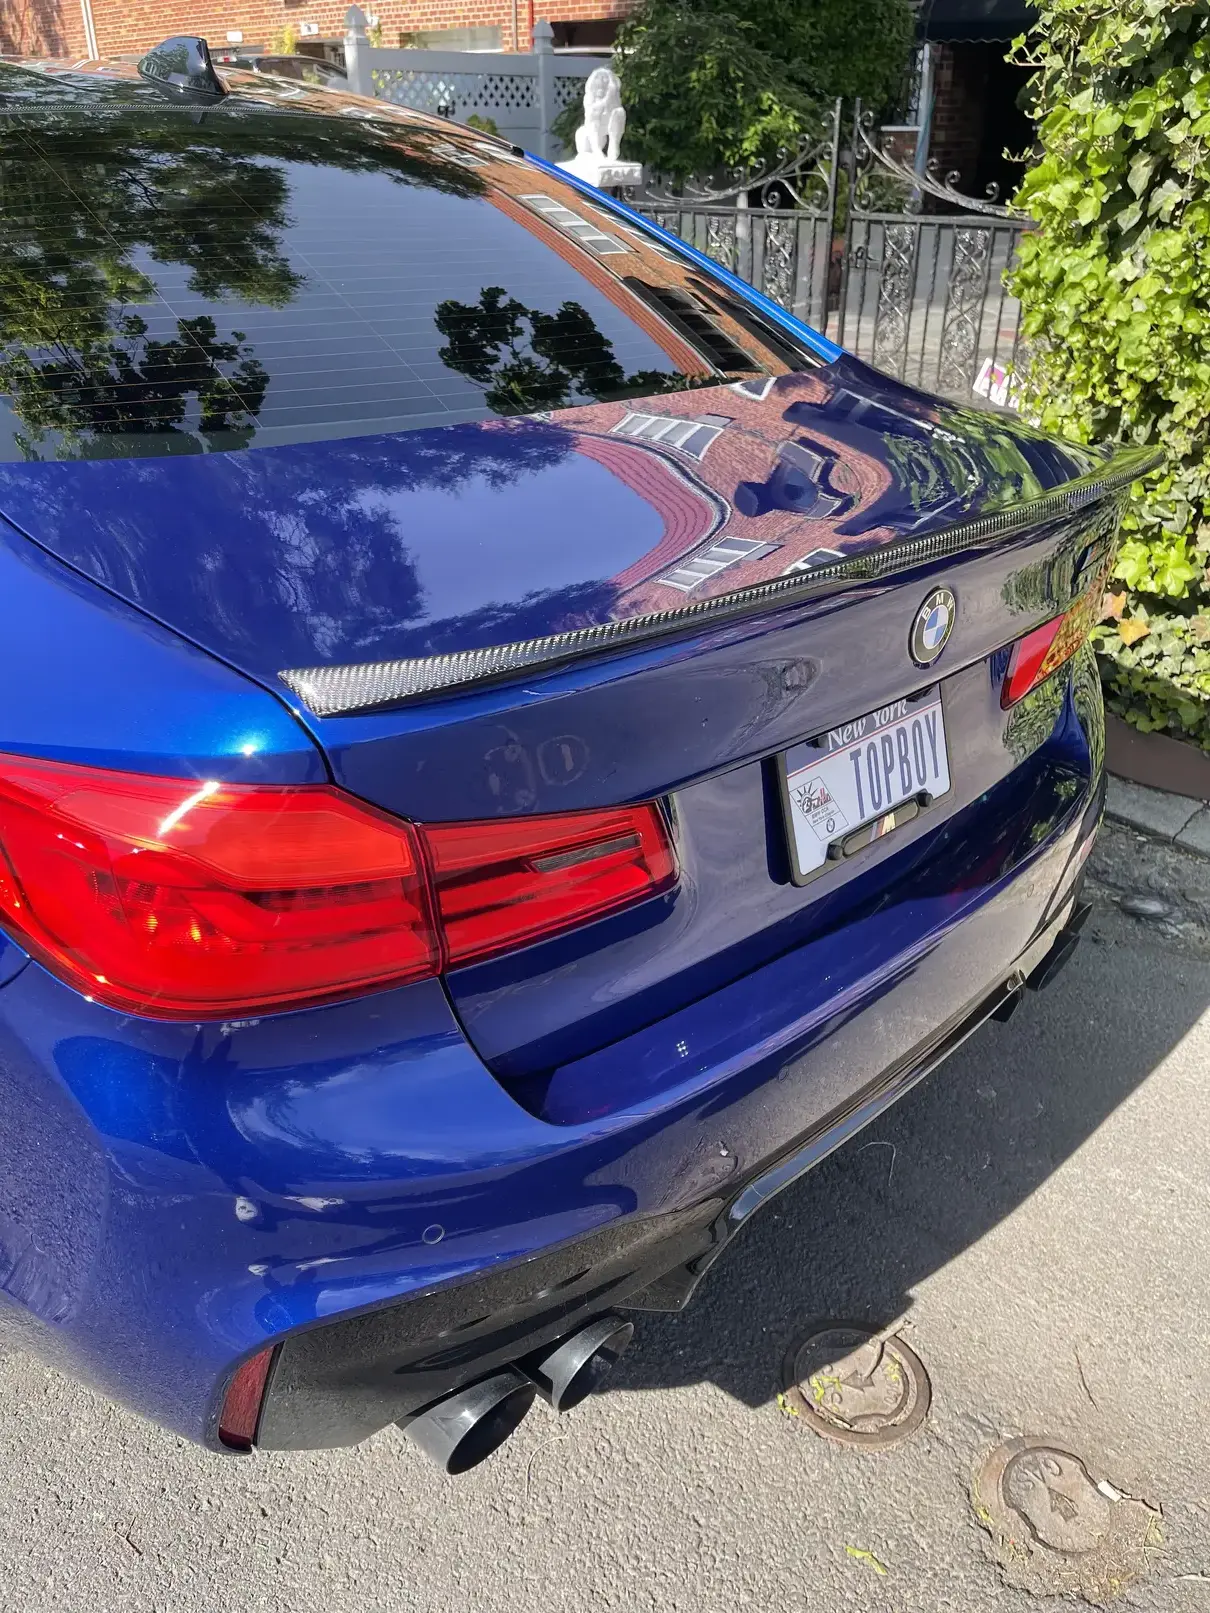 Rear picture of blue BMW m5 after cleaning TOPBOY